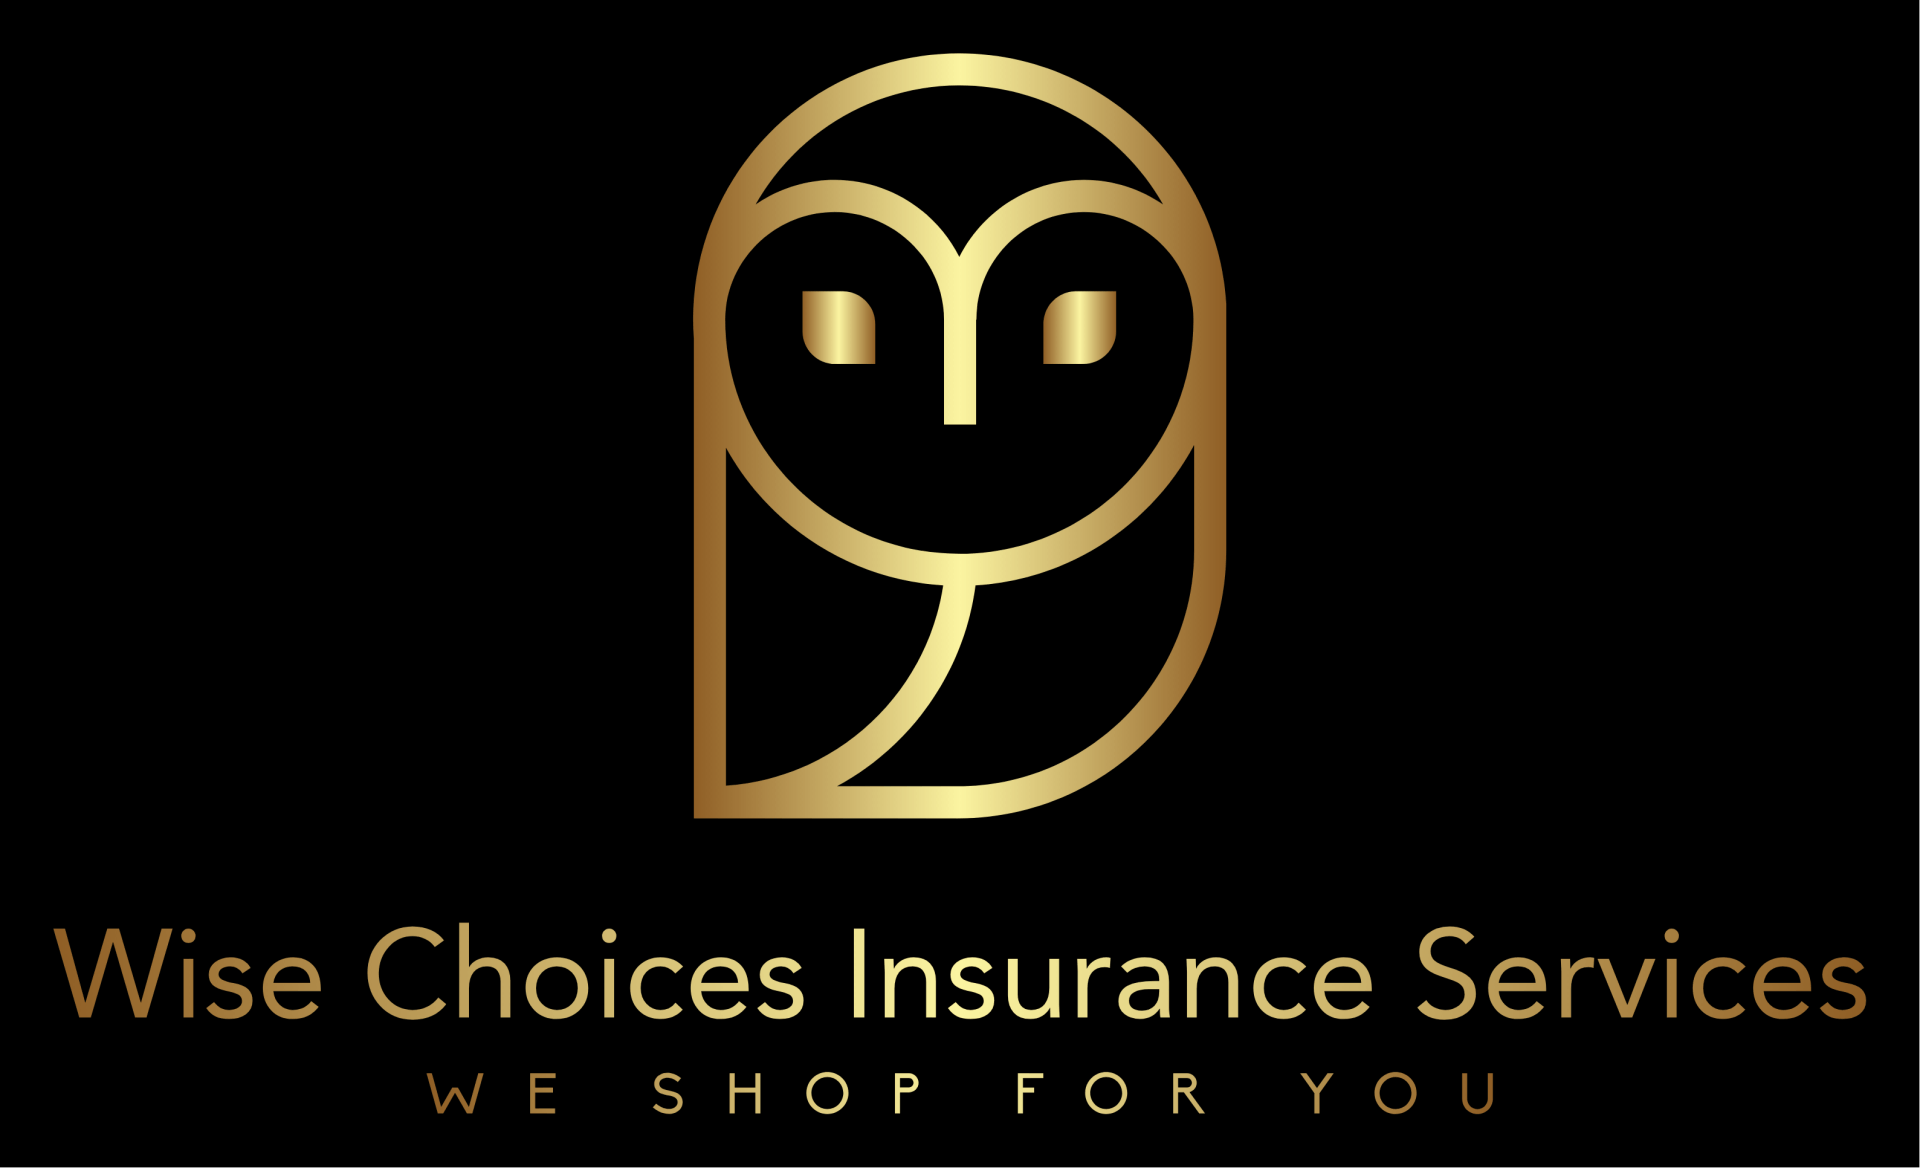 wise choices insurance services logo